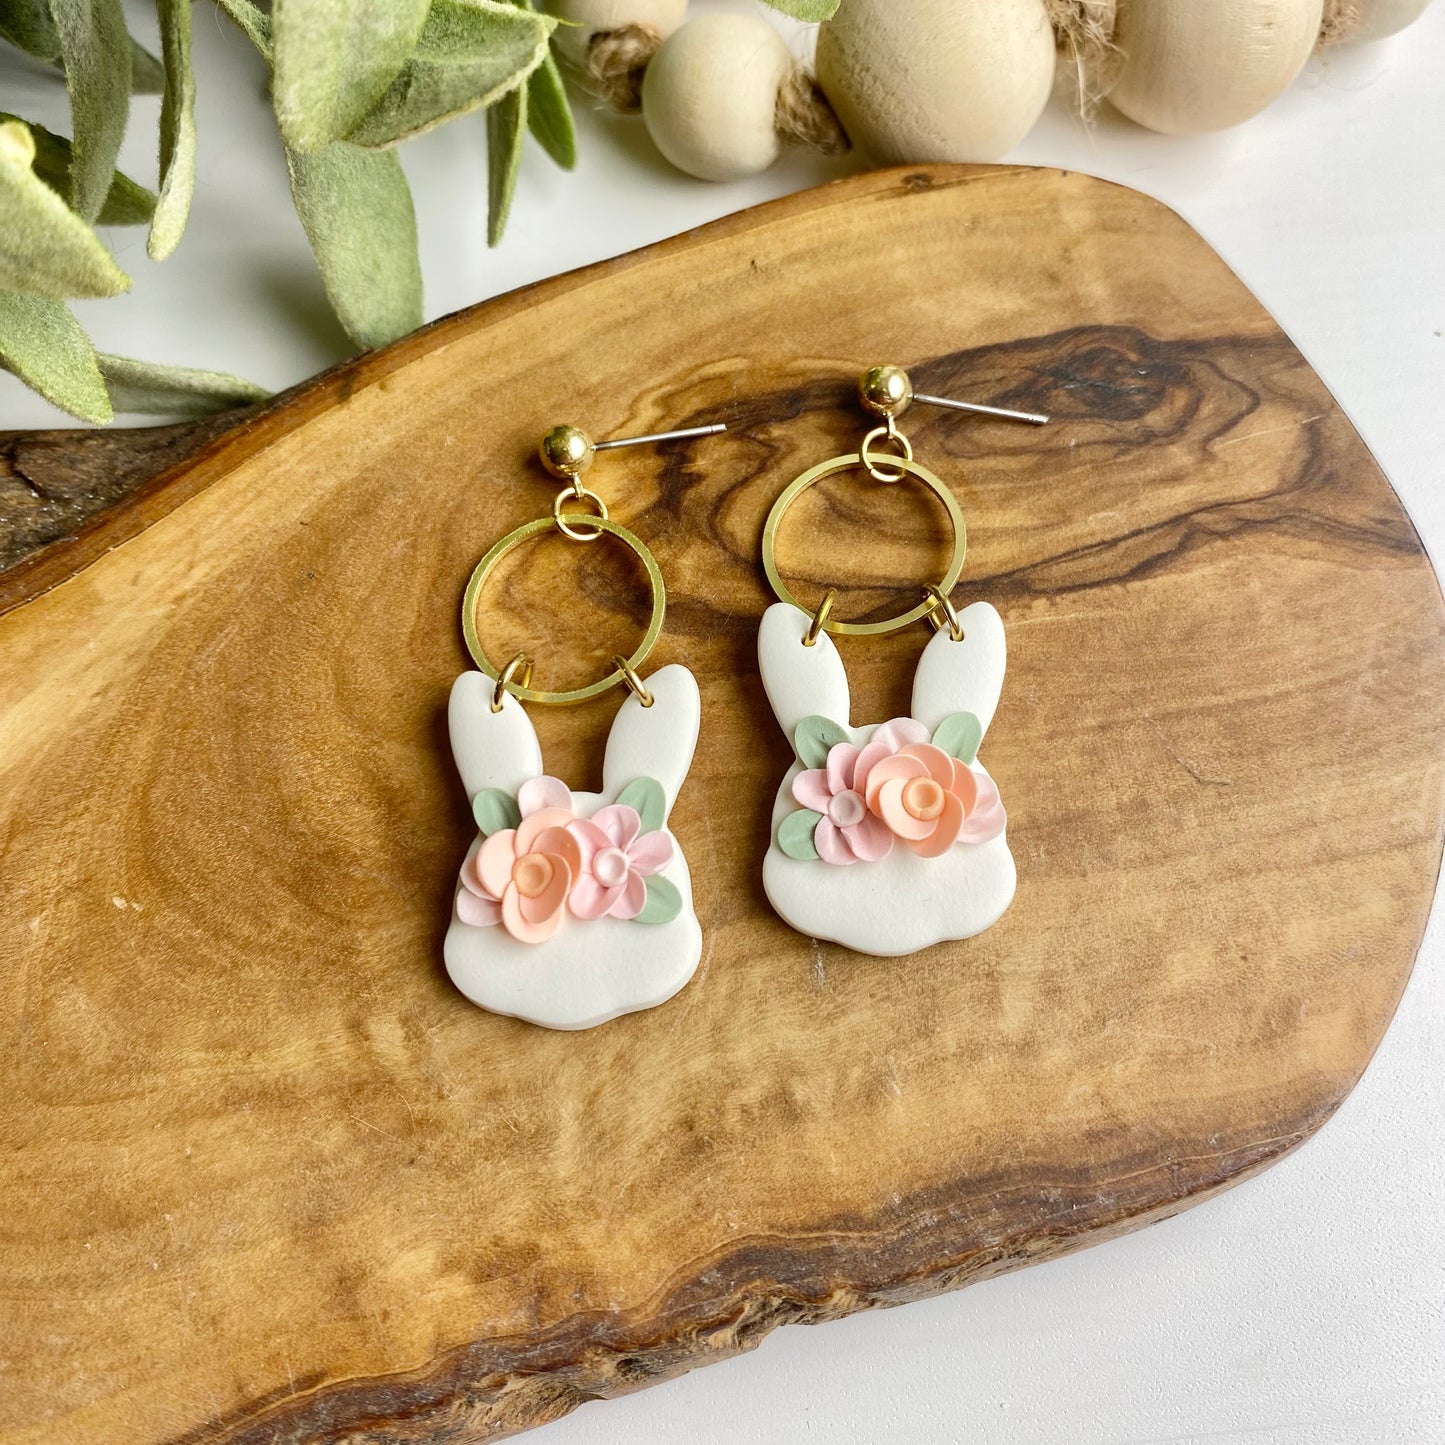 Bunny Dangles with Brass Rings